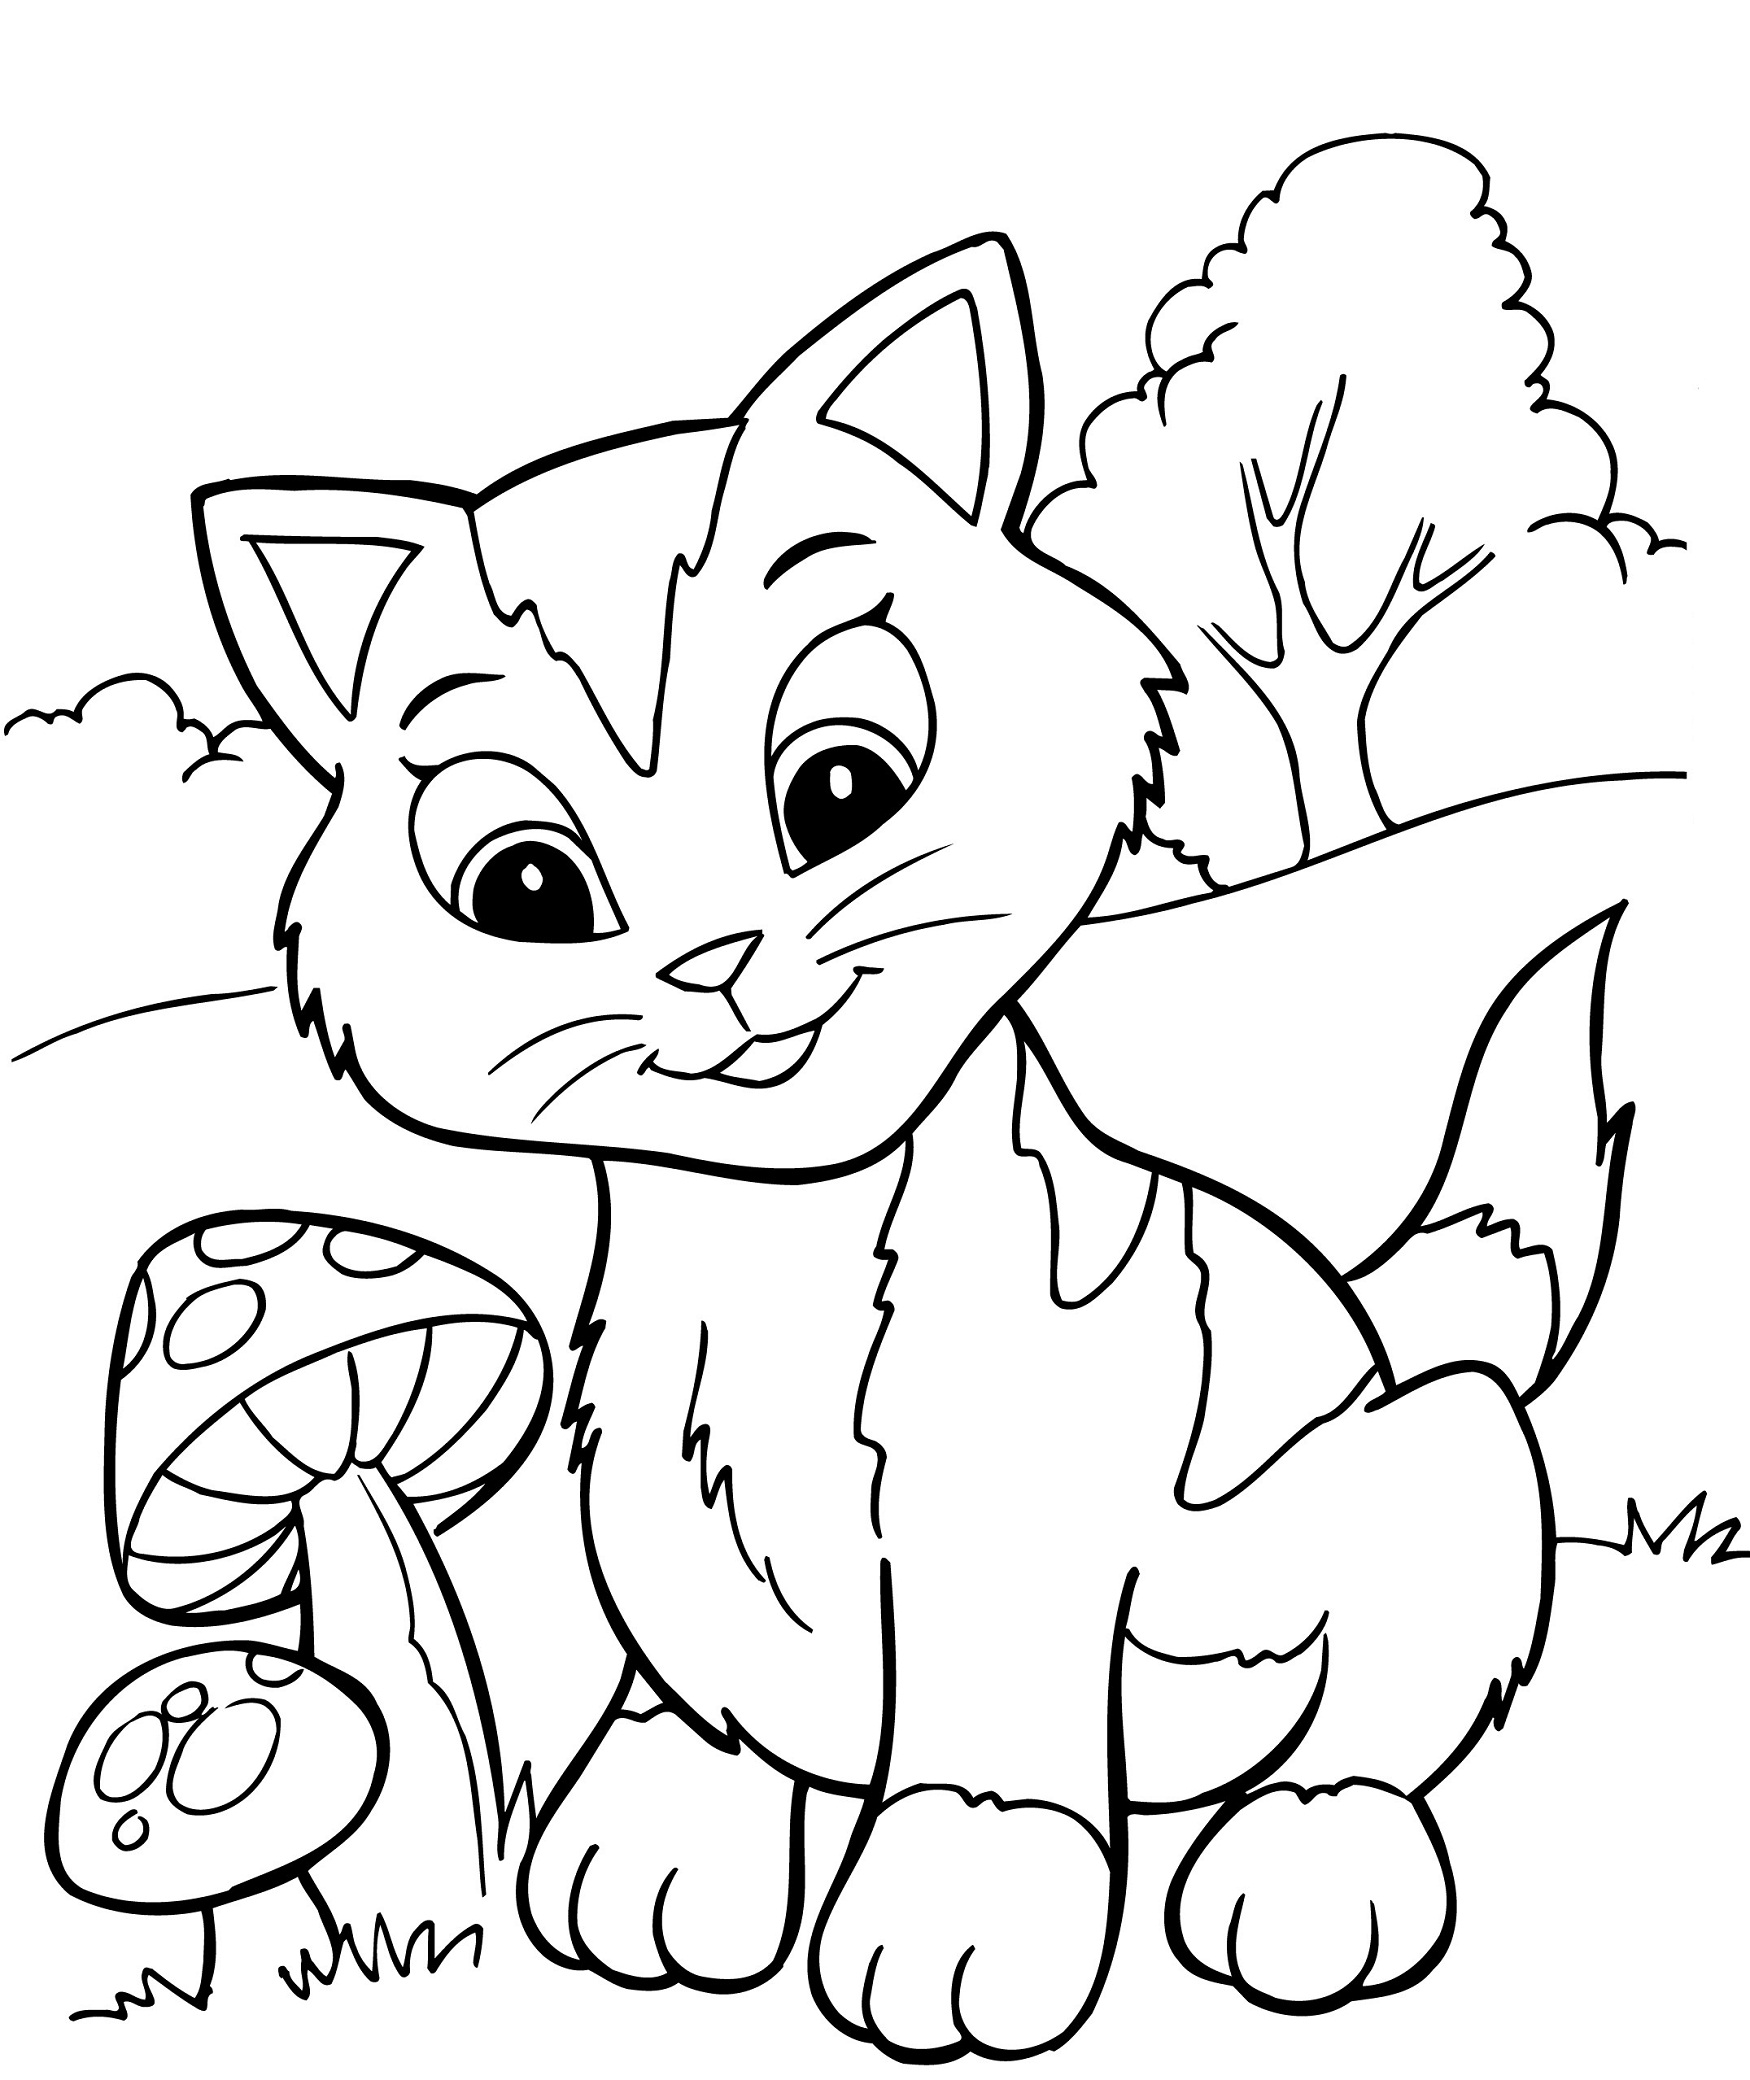 Download Free Printable Kitten Coloring Pages For Kids - Best Coloring Pages For Kids